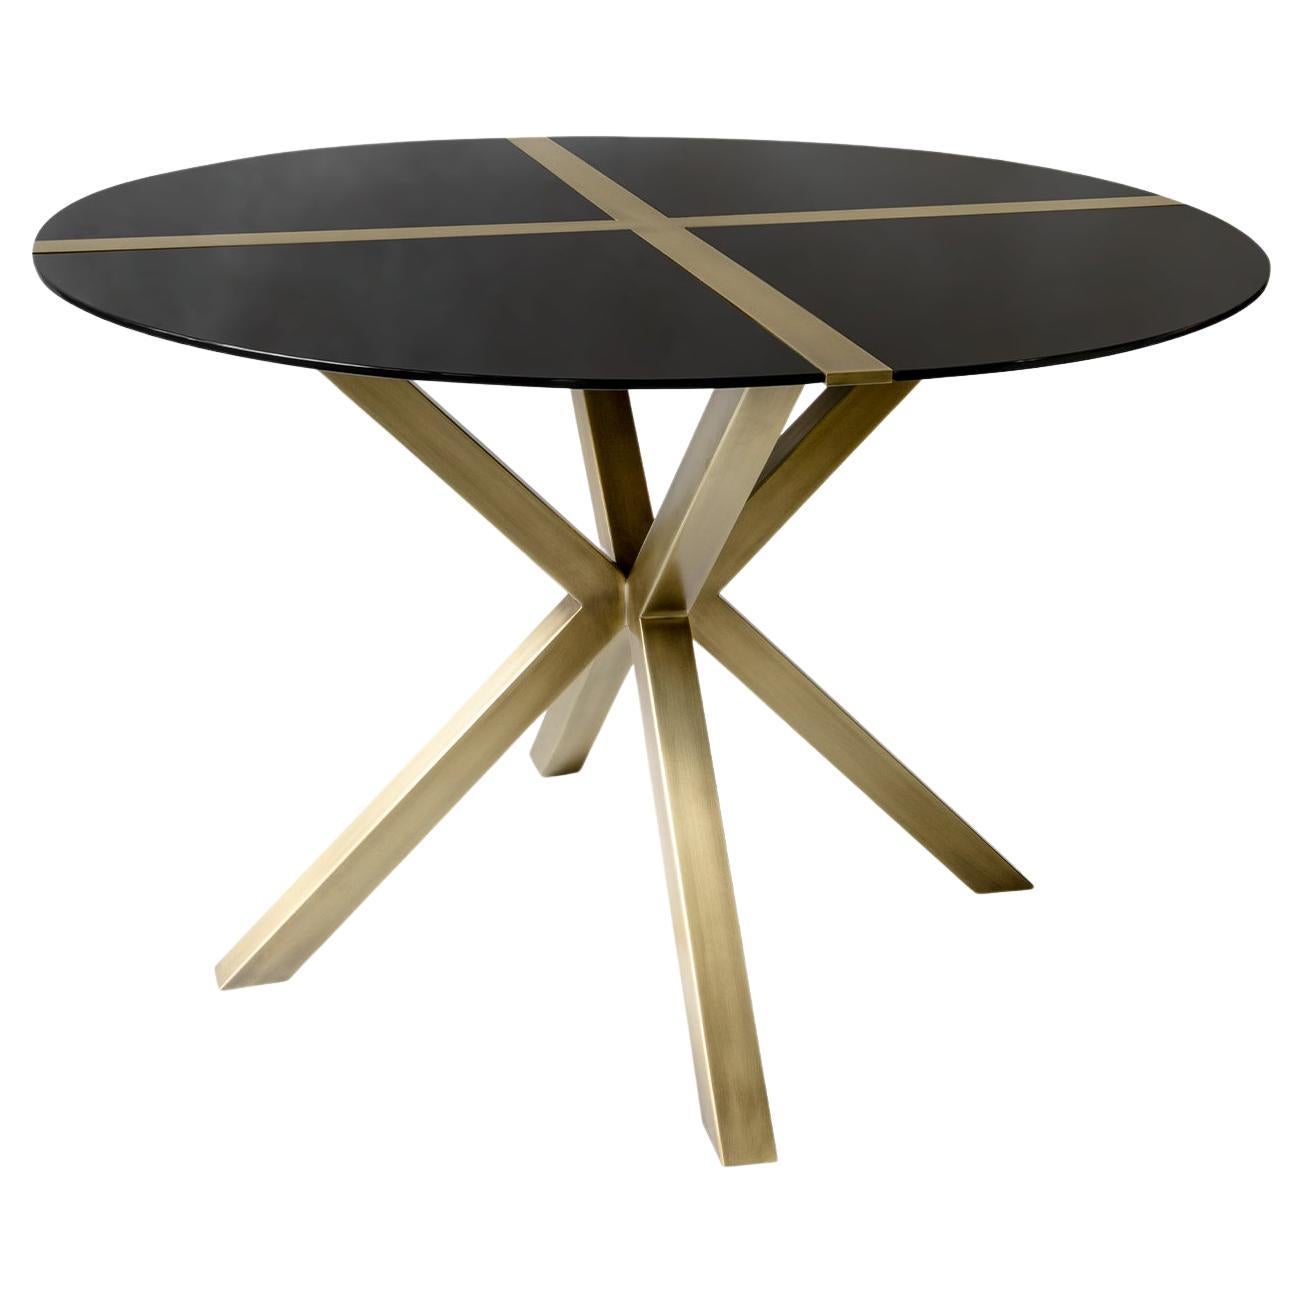 Hidden Round Black Glass and Brass Dining Table